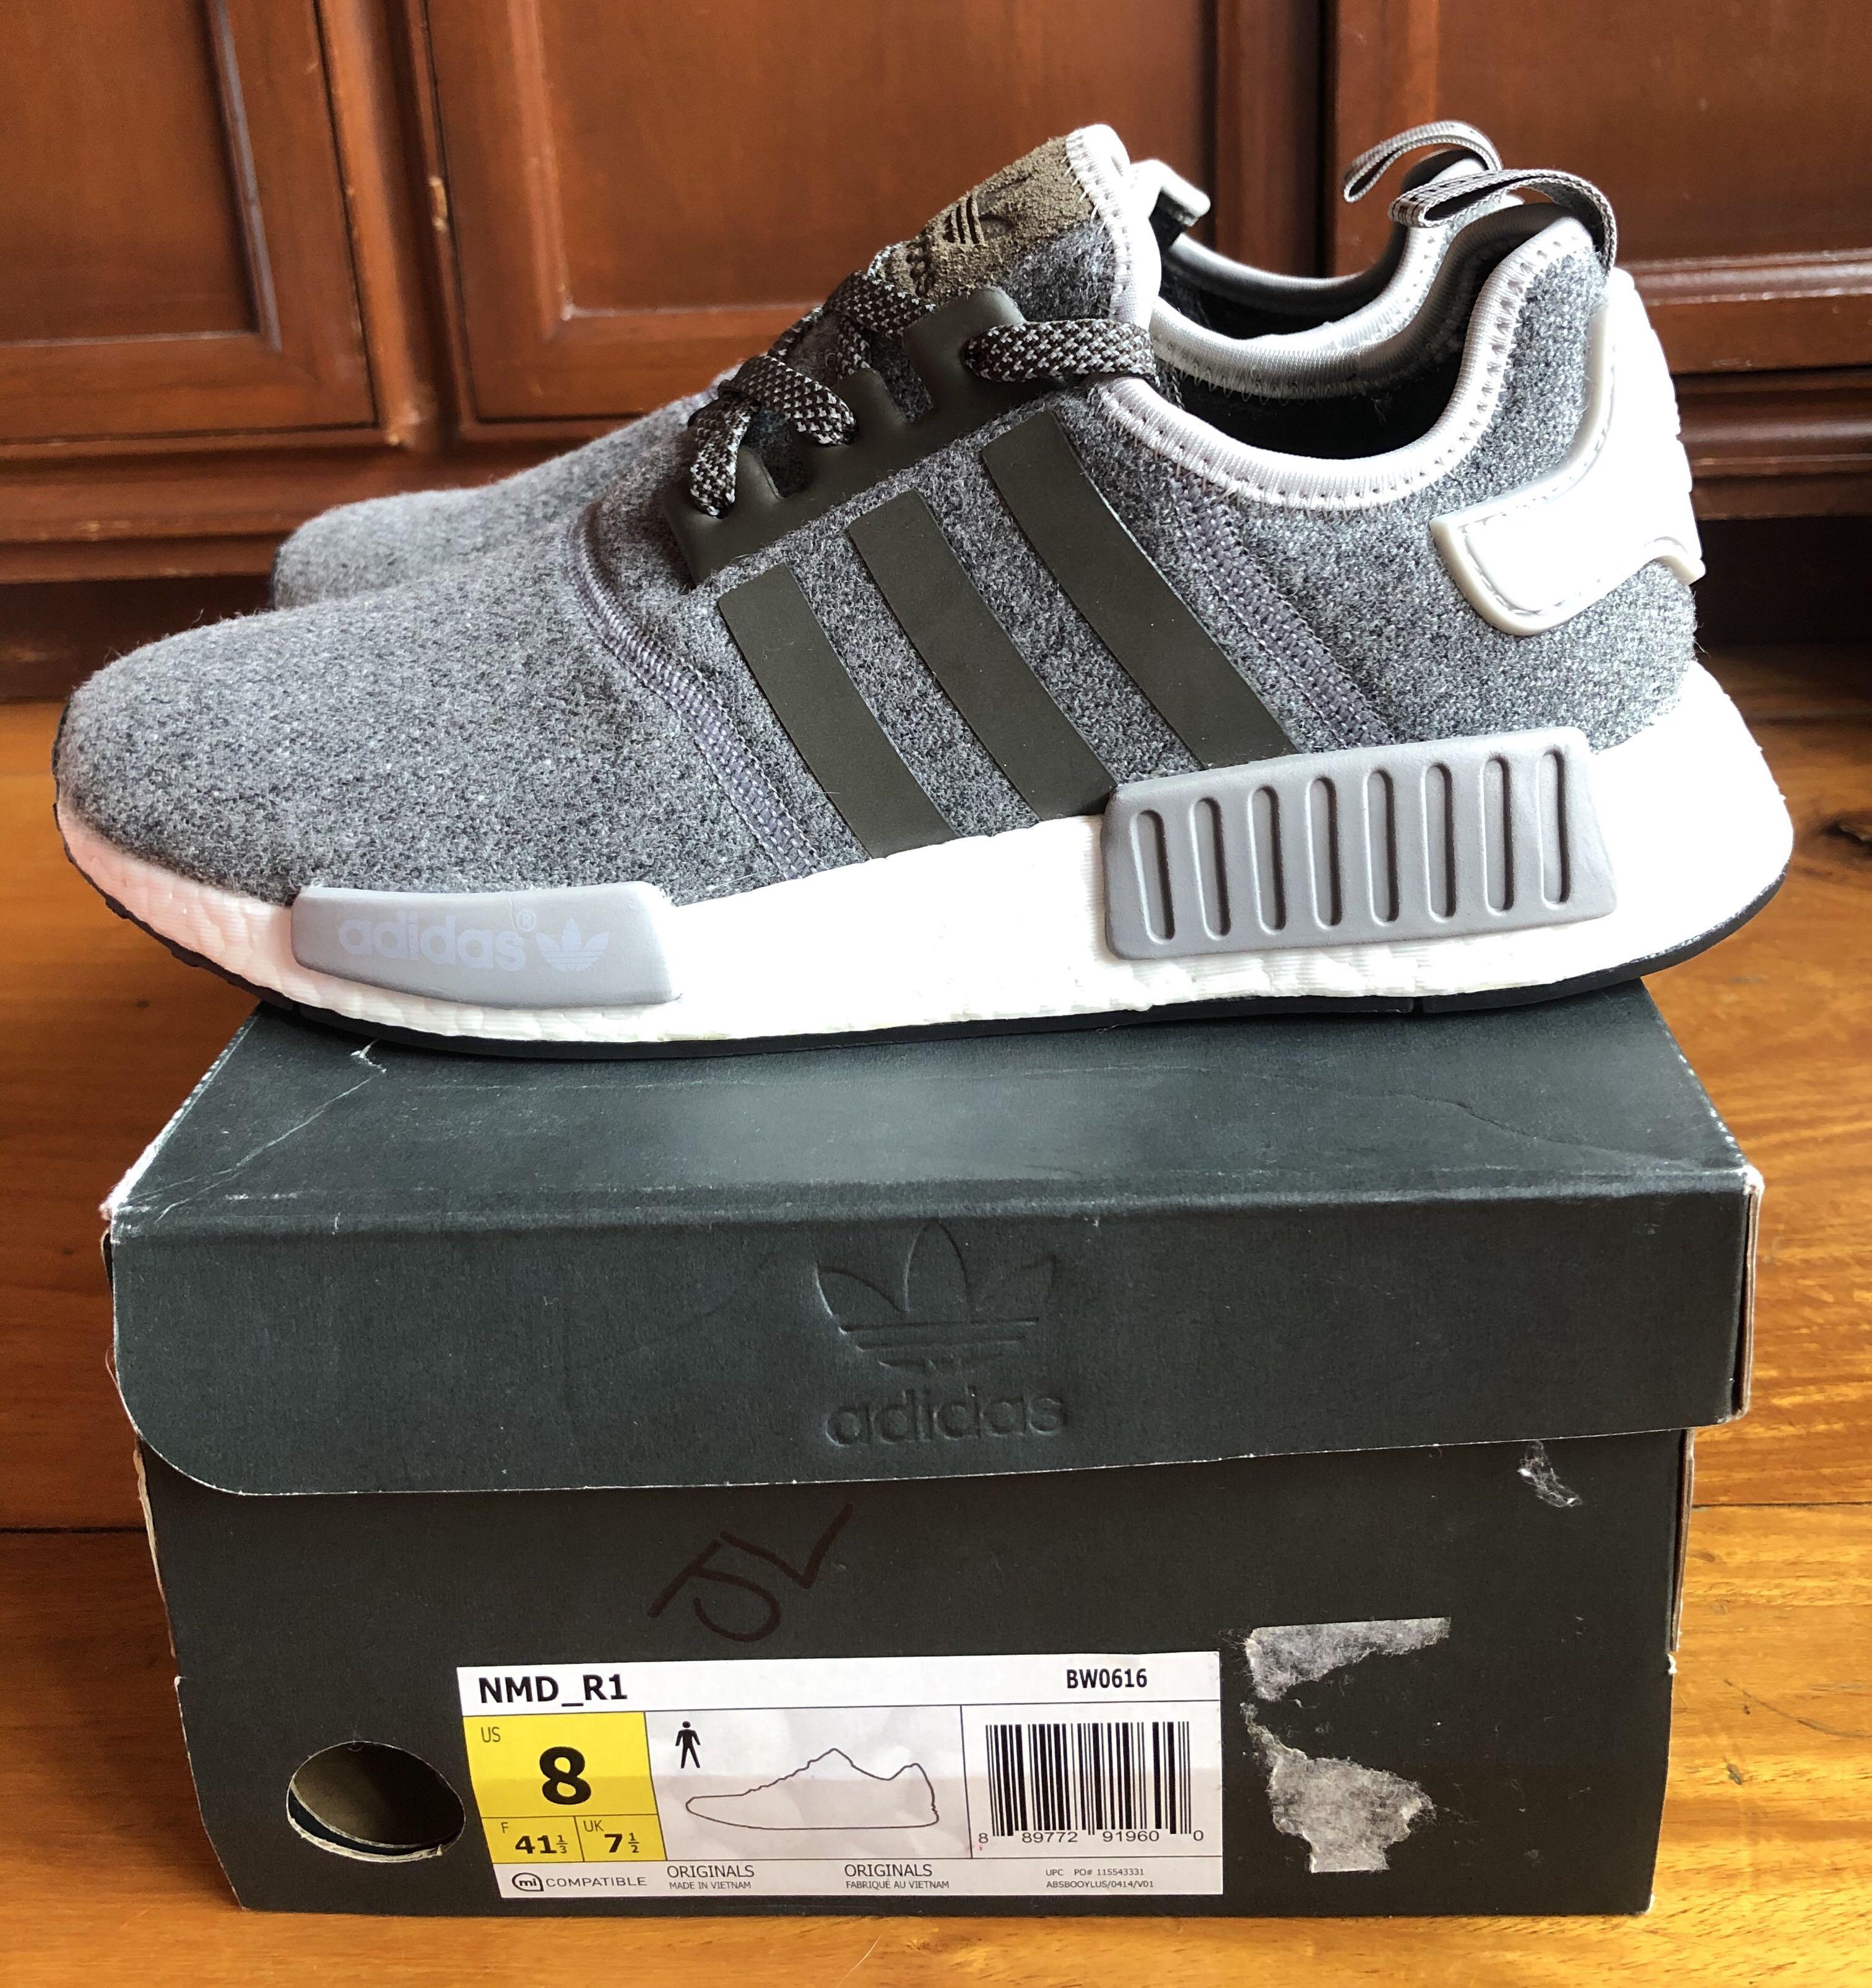 nmd r1 size 8